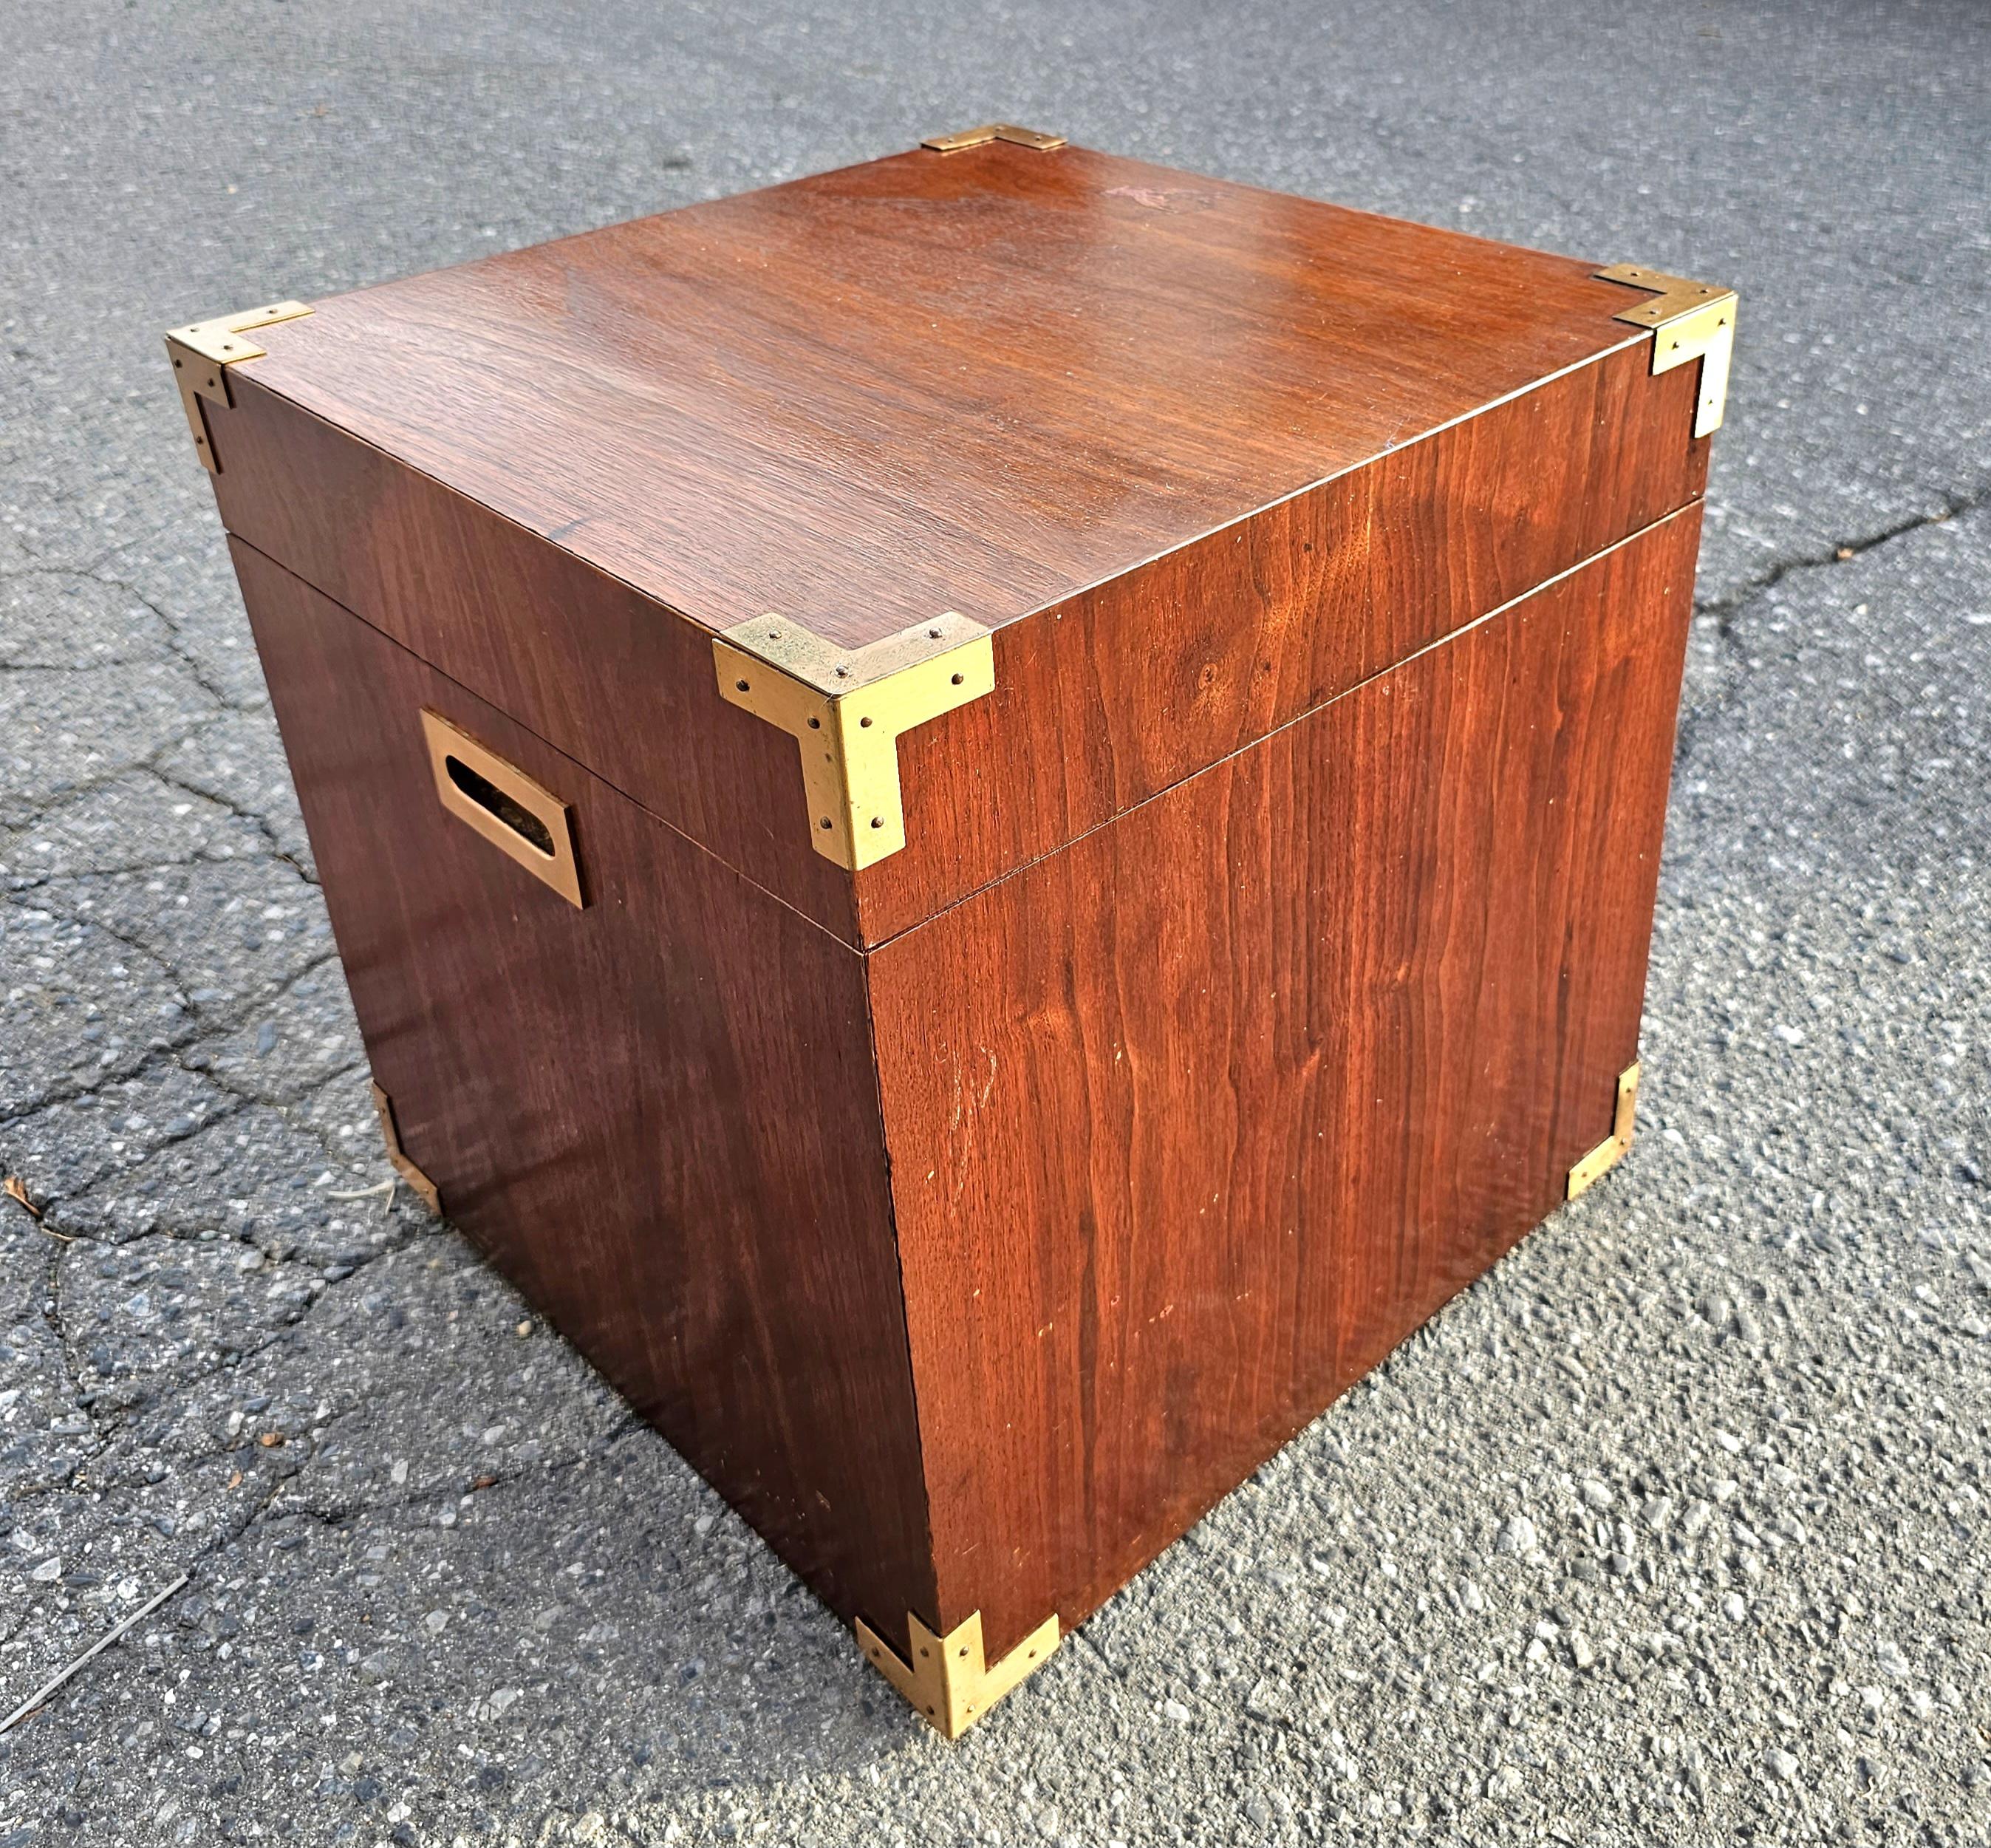 A very unique Pair of Mid Century Teak Campaign Style Cubical Side Tables Chests. Measure 17